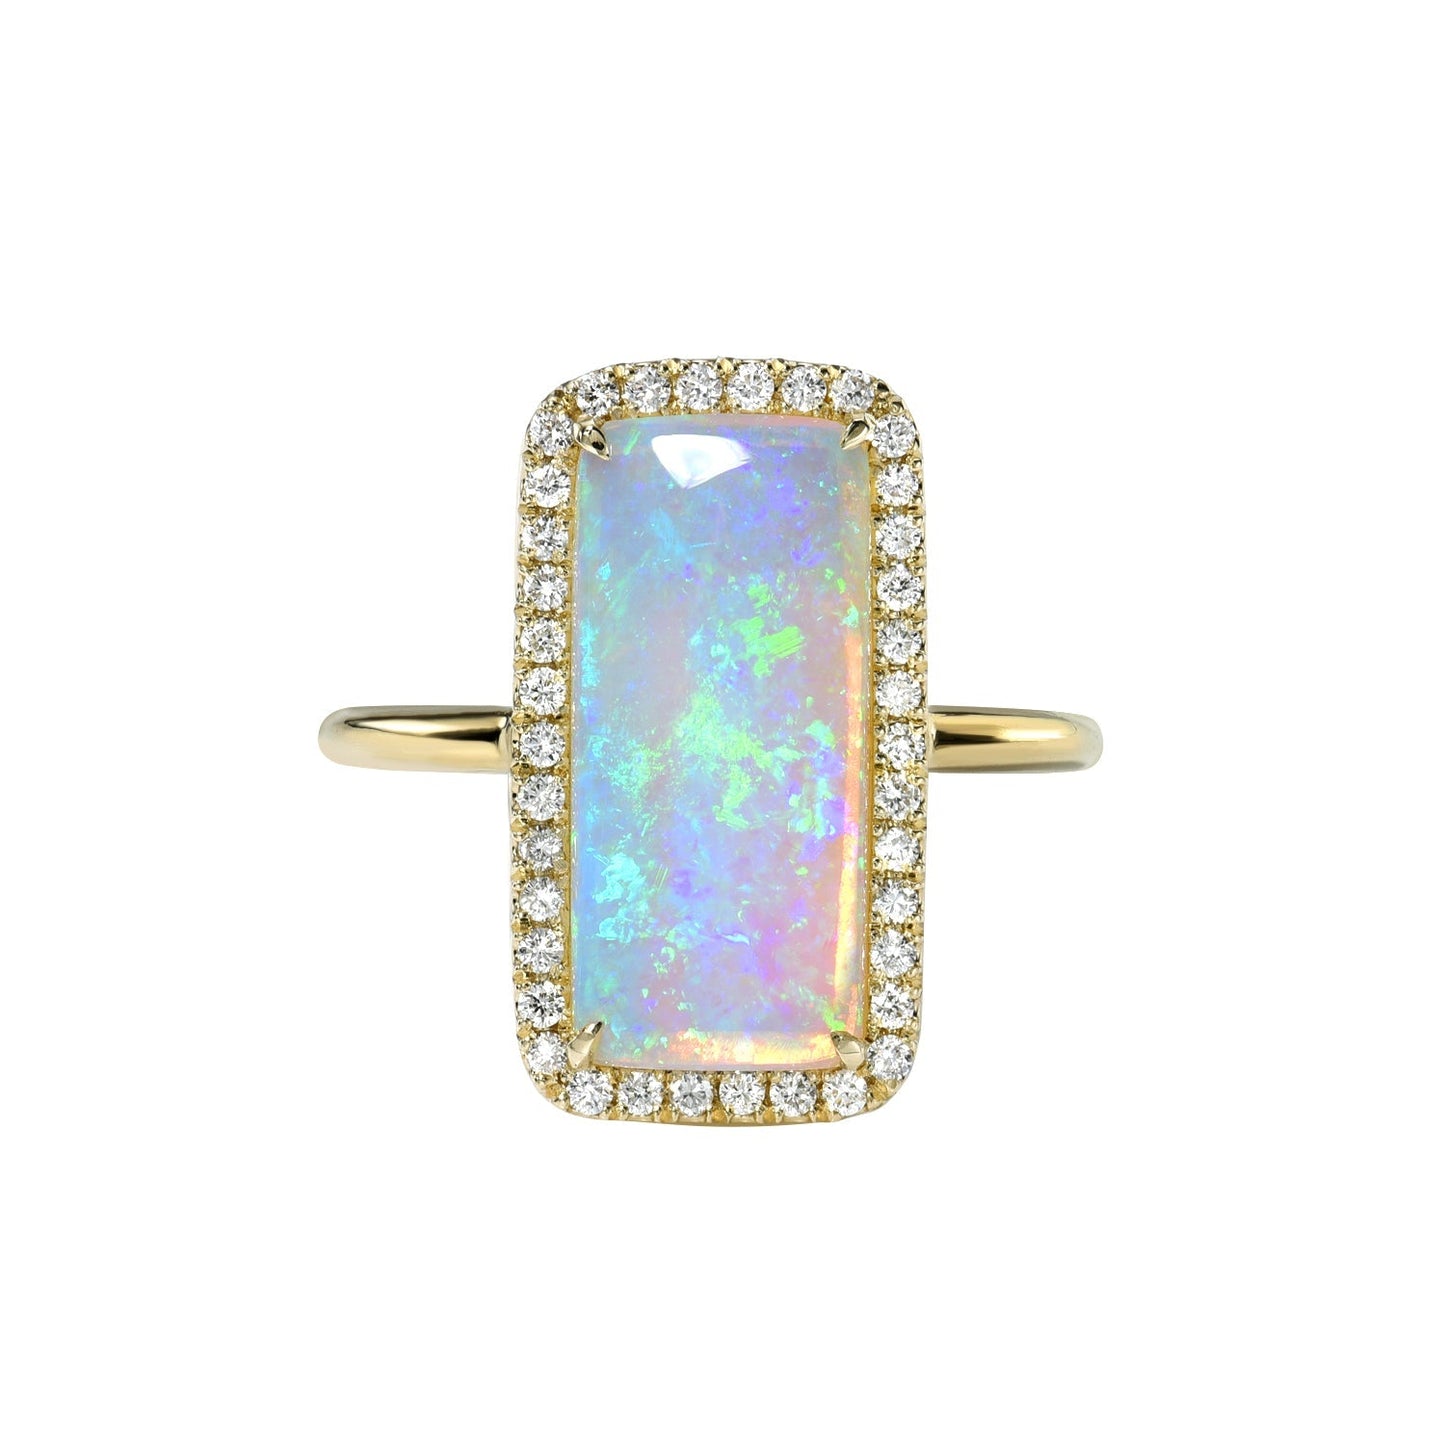 An Australian Opal Ring by NIXIN Jewelry with a Crystal Opal shown in front of a white backdrop.